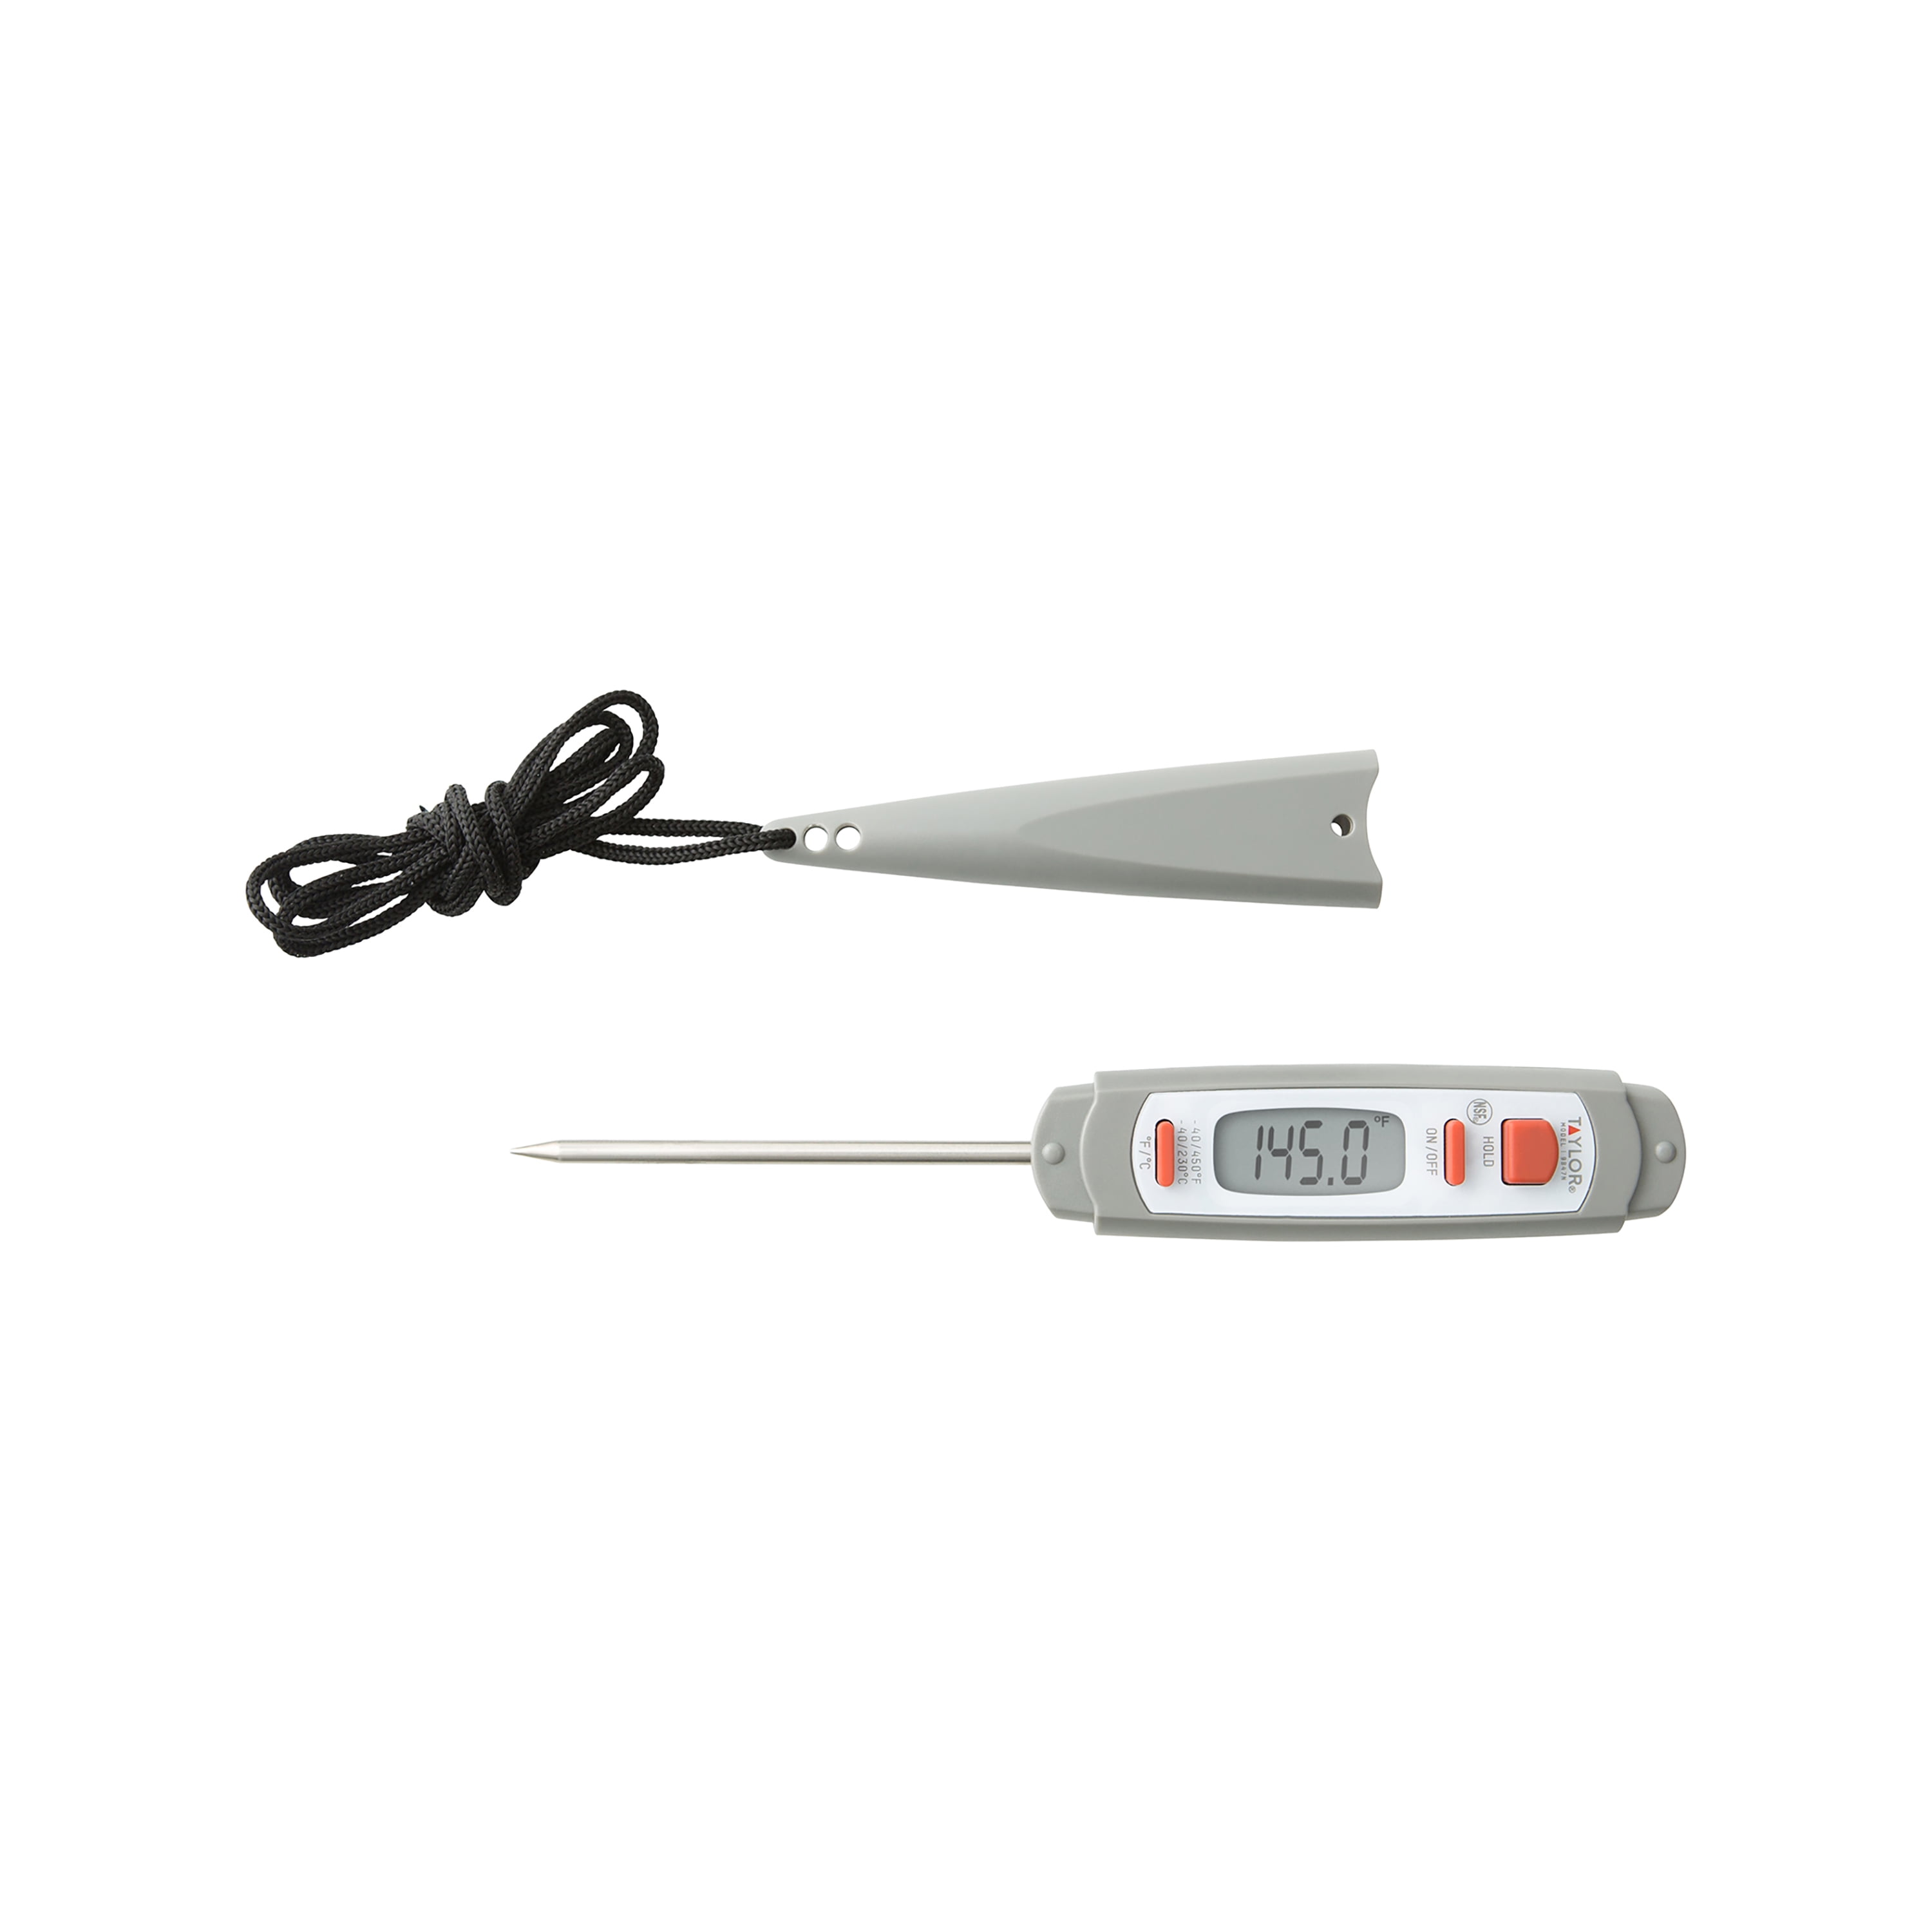 YHDSN Portable Cooking and Candy Spatula Digital Thermometer for